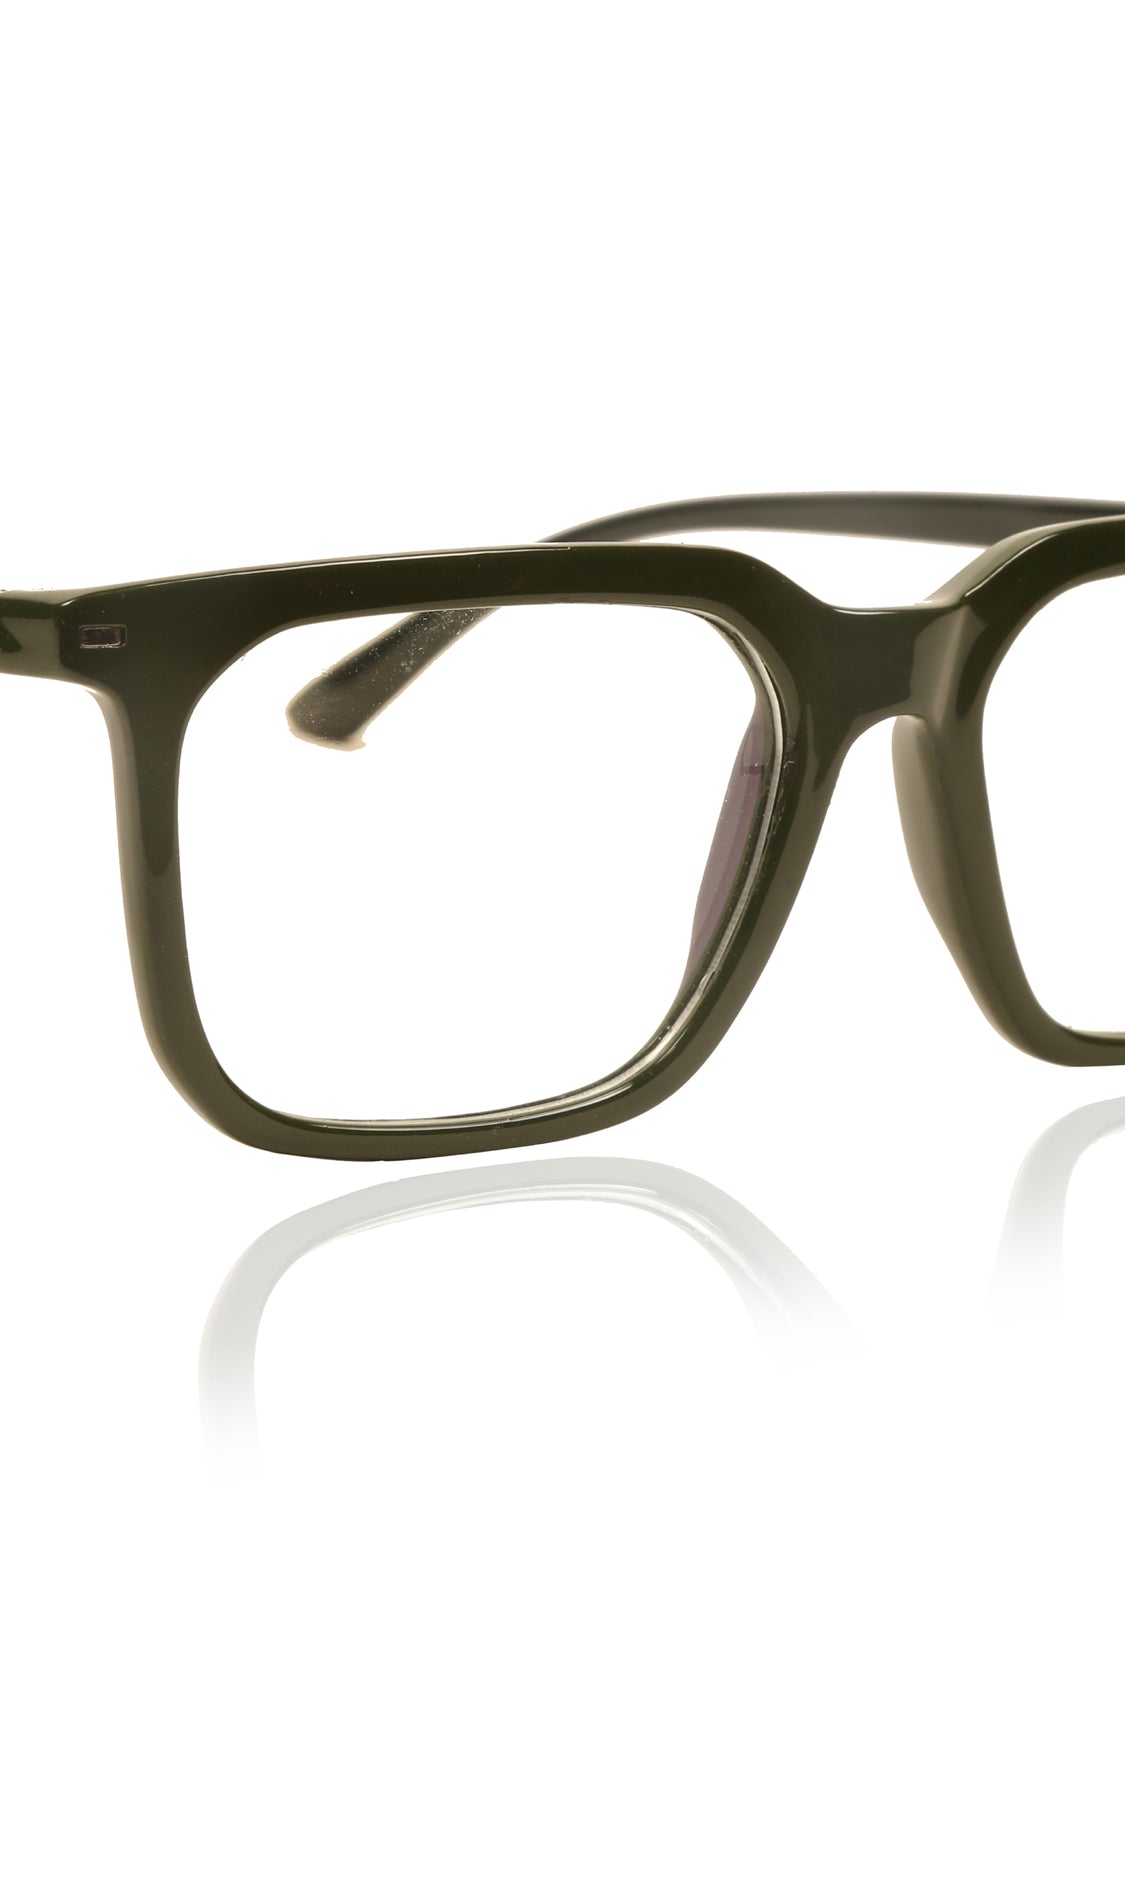 Jodykoes® Colour Frame Series: Stylish Square Spectacle Frames with Blue Ray Protection and Anti-Glare Glasses for Men and Women (Green) - Jodykoes ®